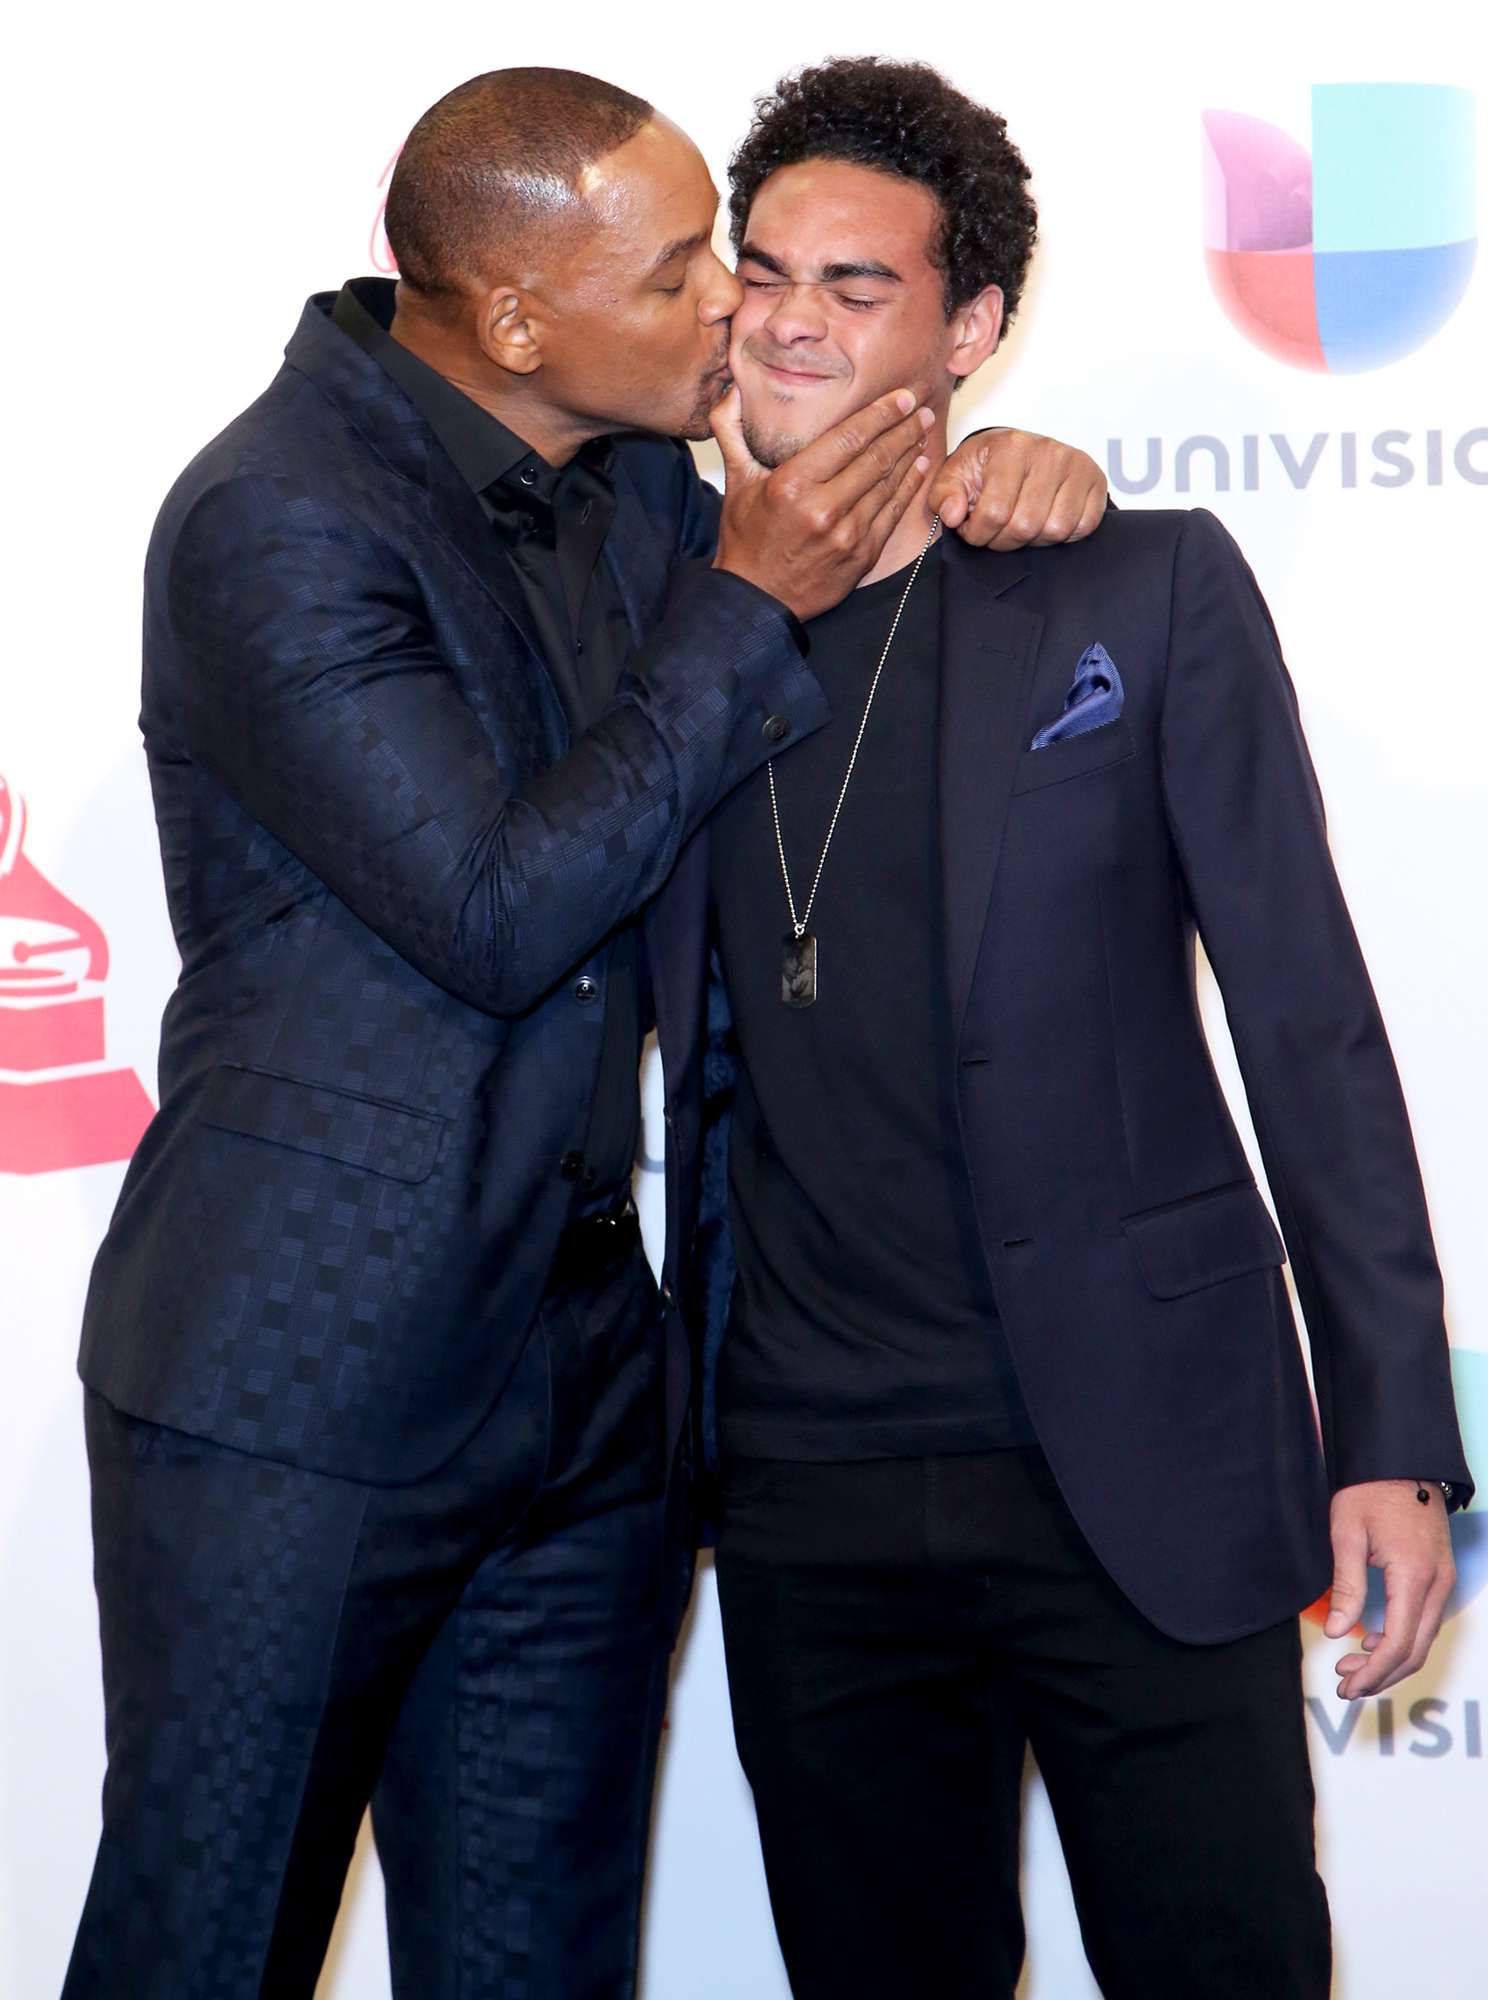 Will Smith (L) and Willard Christopher Smith III pose in the press room during the 16th Latin GRAMMY Awards at the MGM Grand Garden Arena on November 19, 2015 in Las Vegas, Nevada